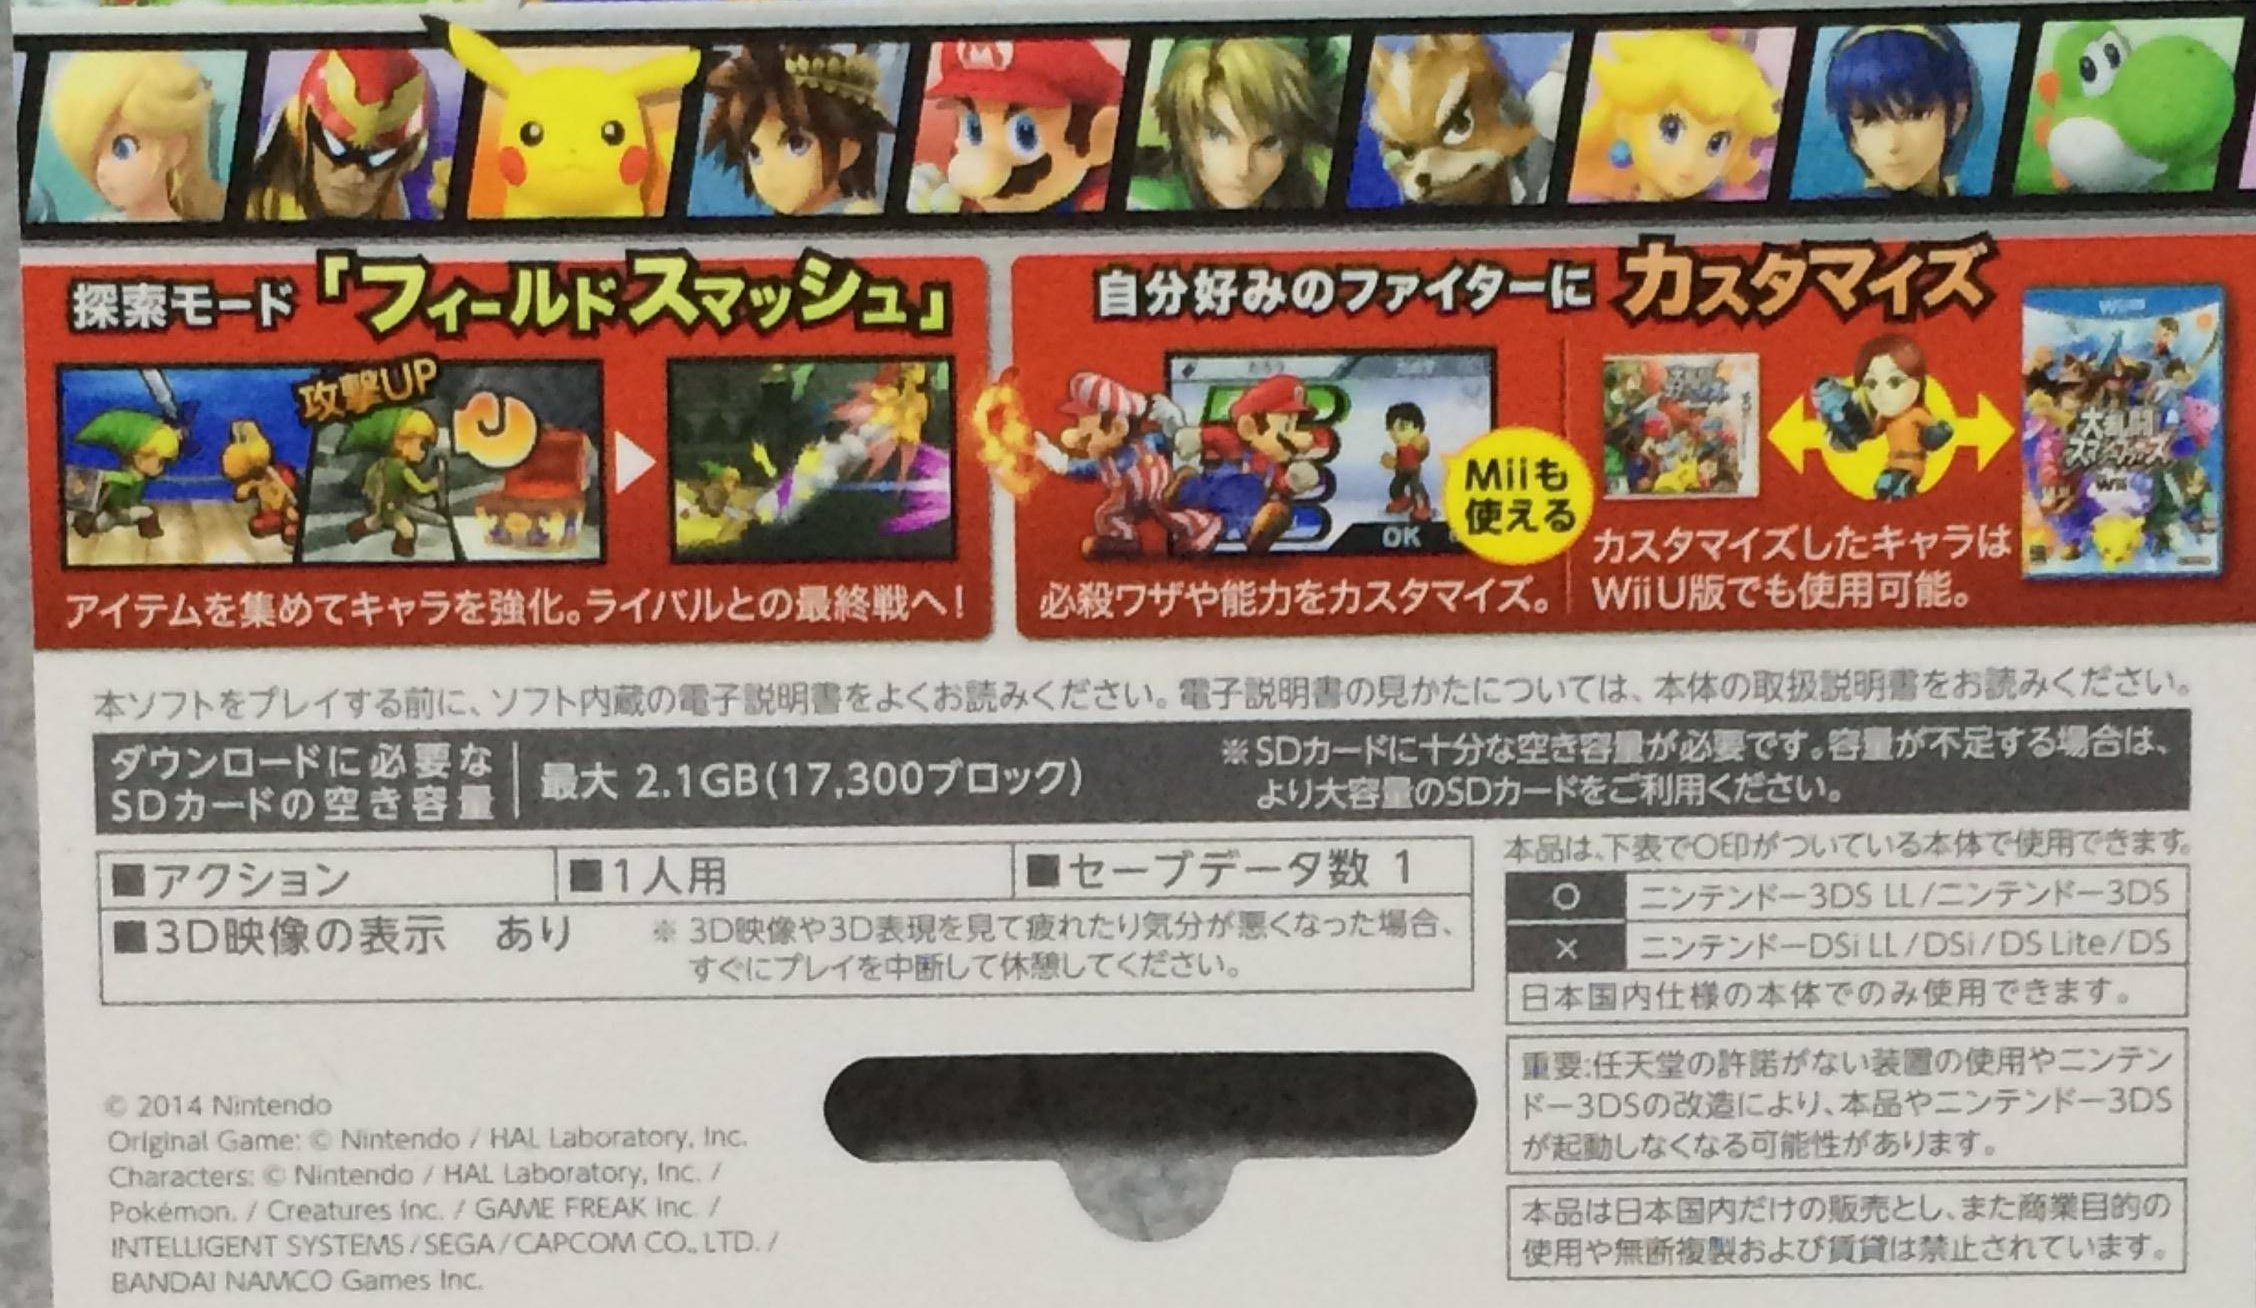 Super Smash Bros For Nintendo 3ds File Size Is 2 1gb According To Japanese Packaging Nintendo Life